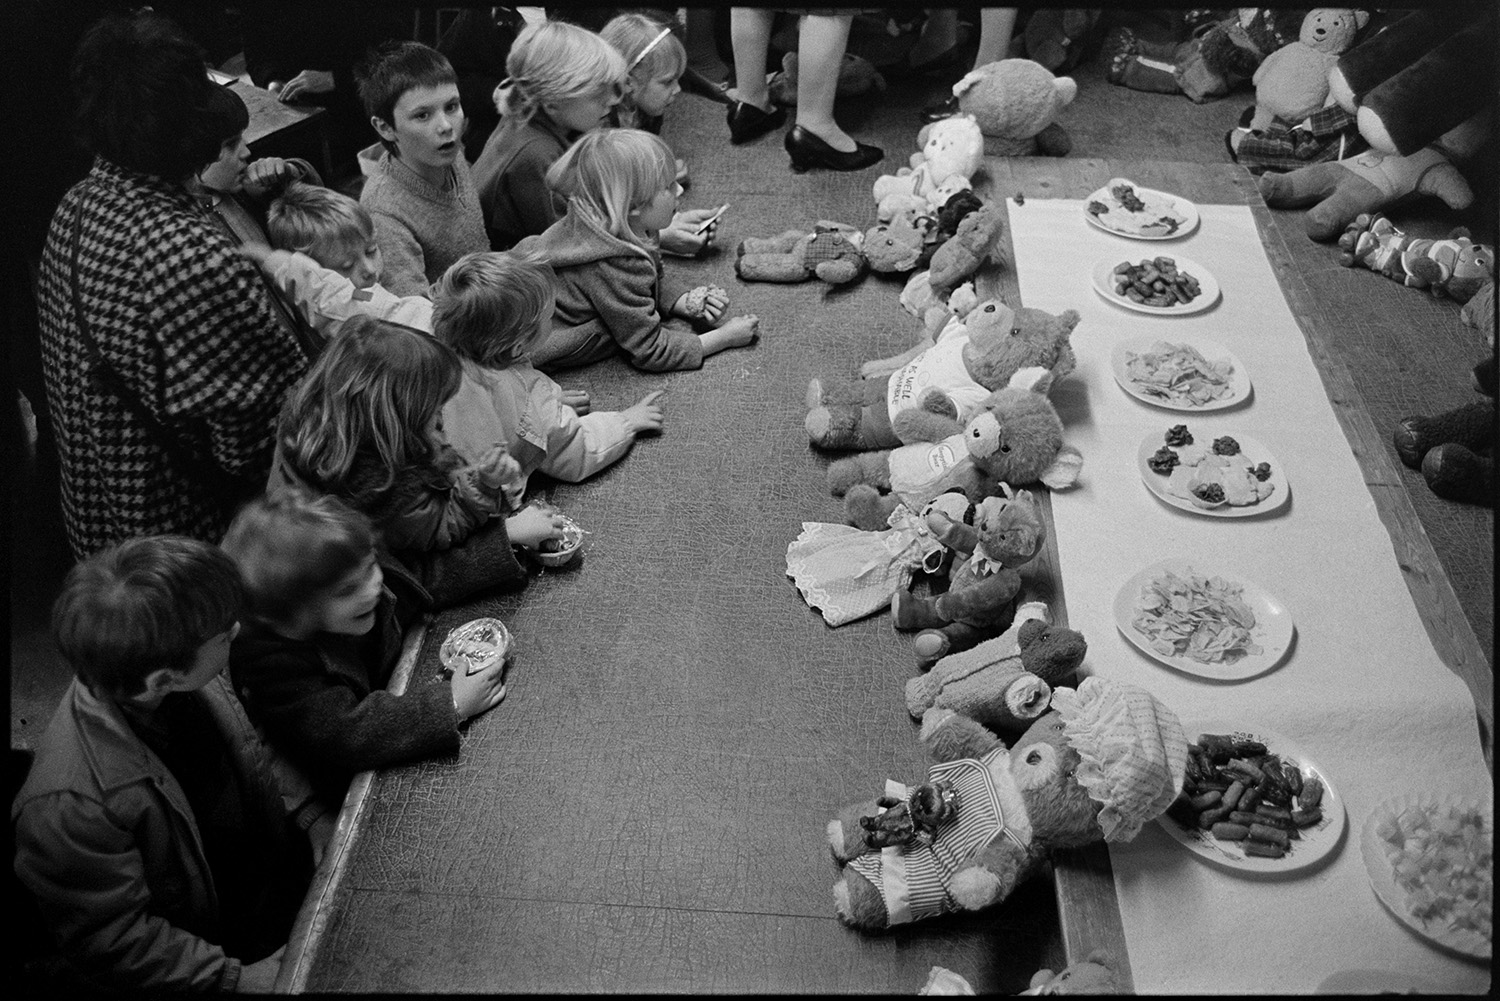 Easter show in village hall teddy bears party, cometition for the oldest bear.
[A group of children looking at a display of teddy bears arranged in a Teddy Bears Picnic tableau in the Easter Show at Dolton Village Hall. Biscuits and crisps are laid out for the teddy bears.]